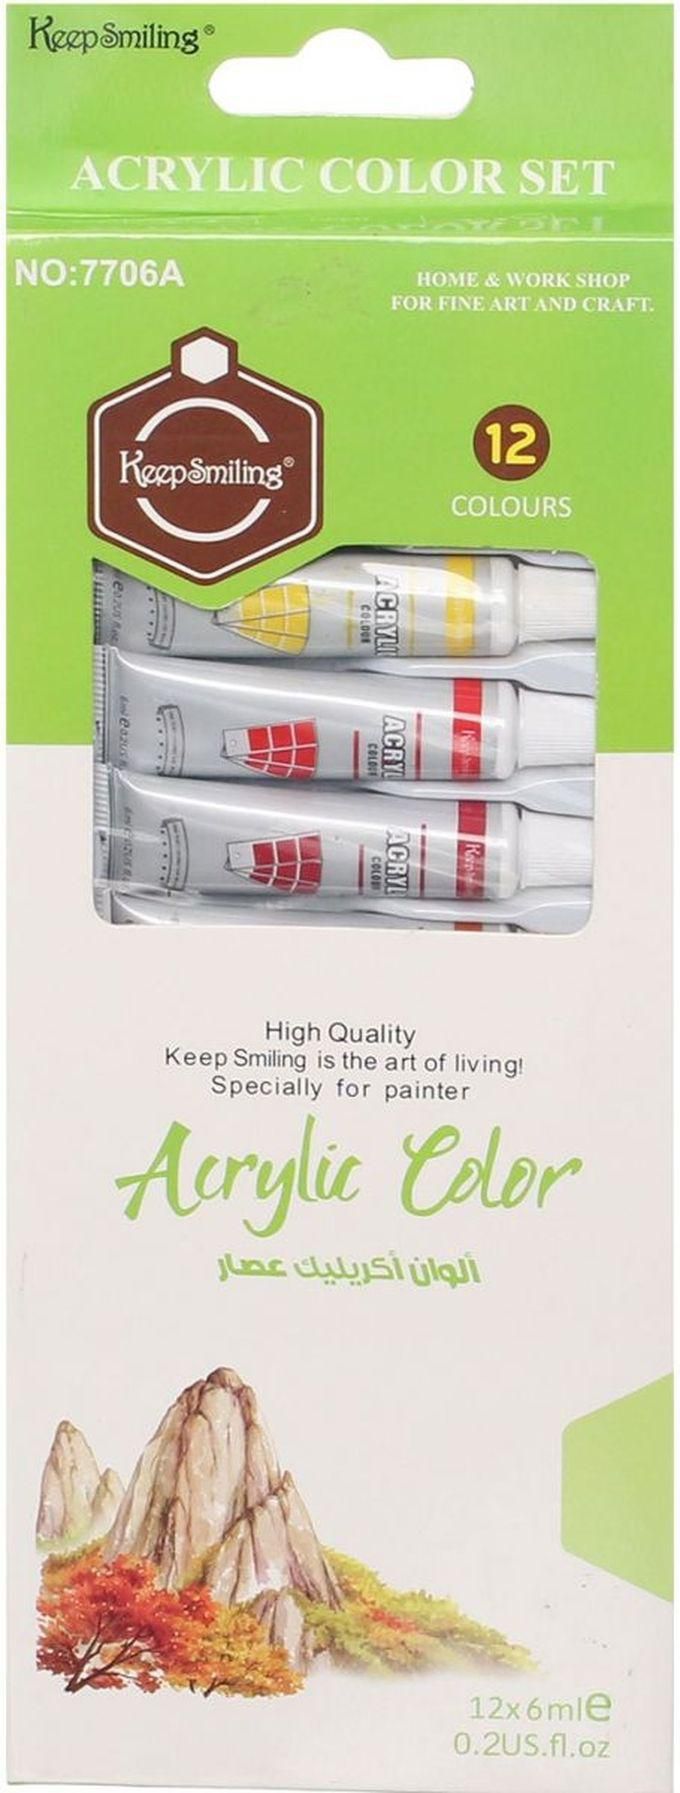 Keep Smiling Acrylic Color Set - 12 Colors